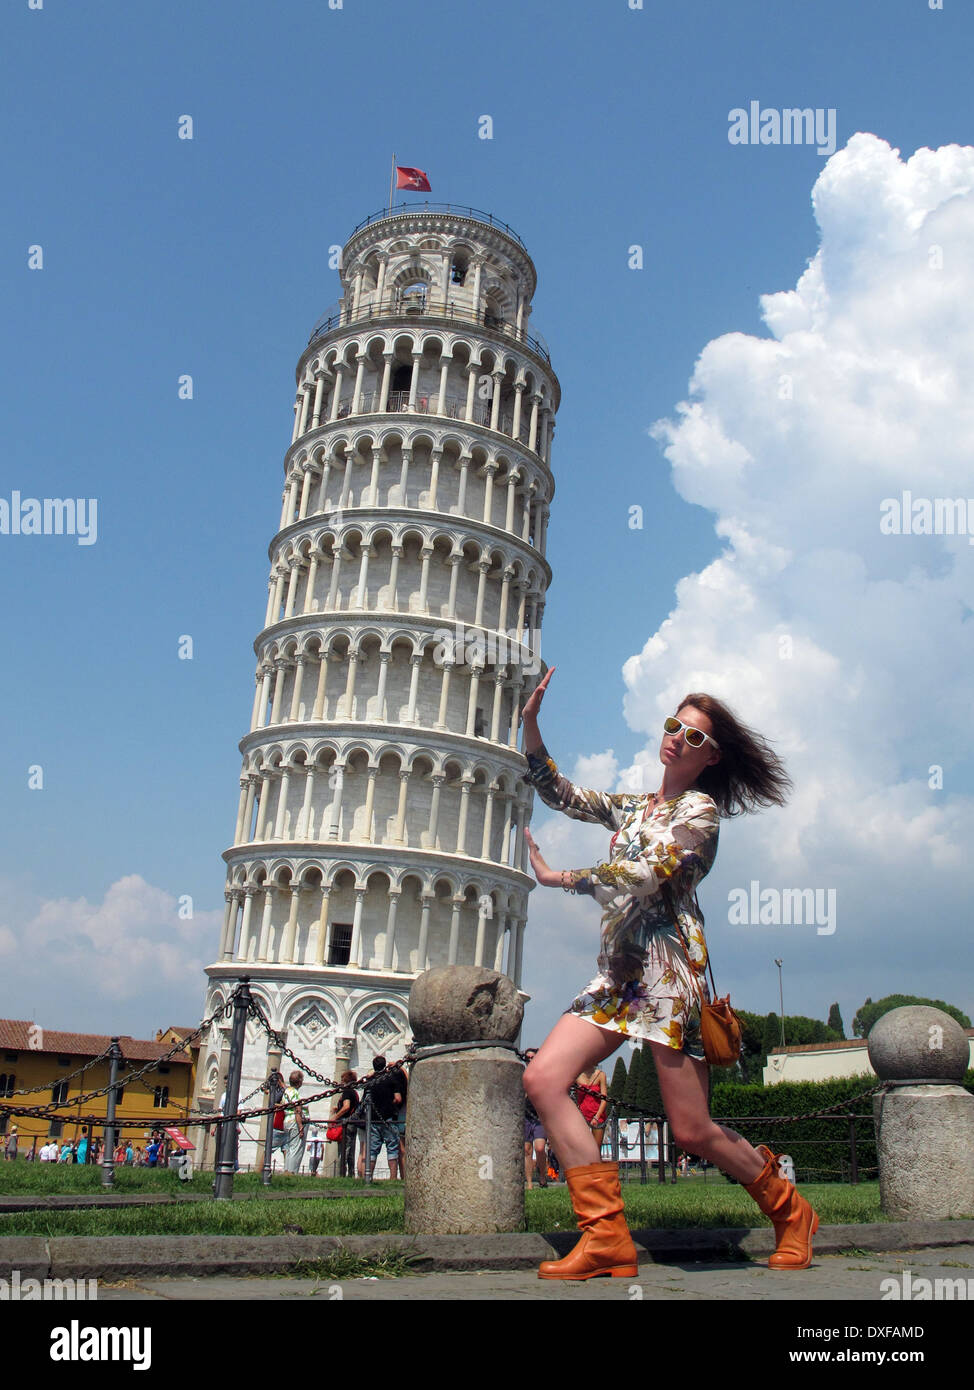 Italy, Tuscany, Pisa, Girl posing by Leaning Tower of Pisa Stock Photo